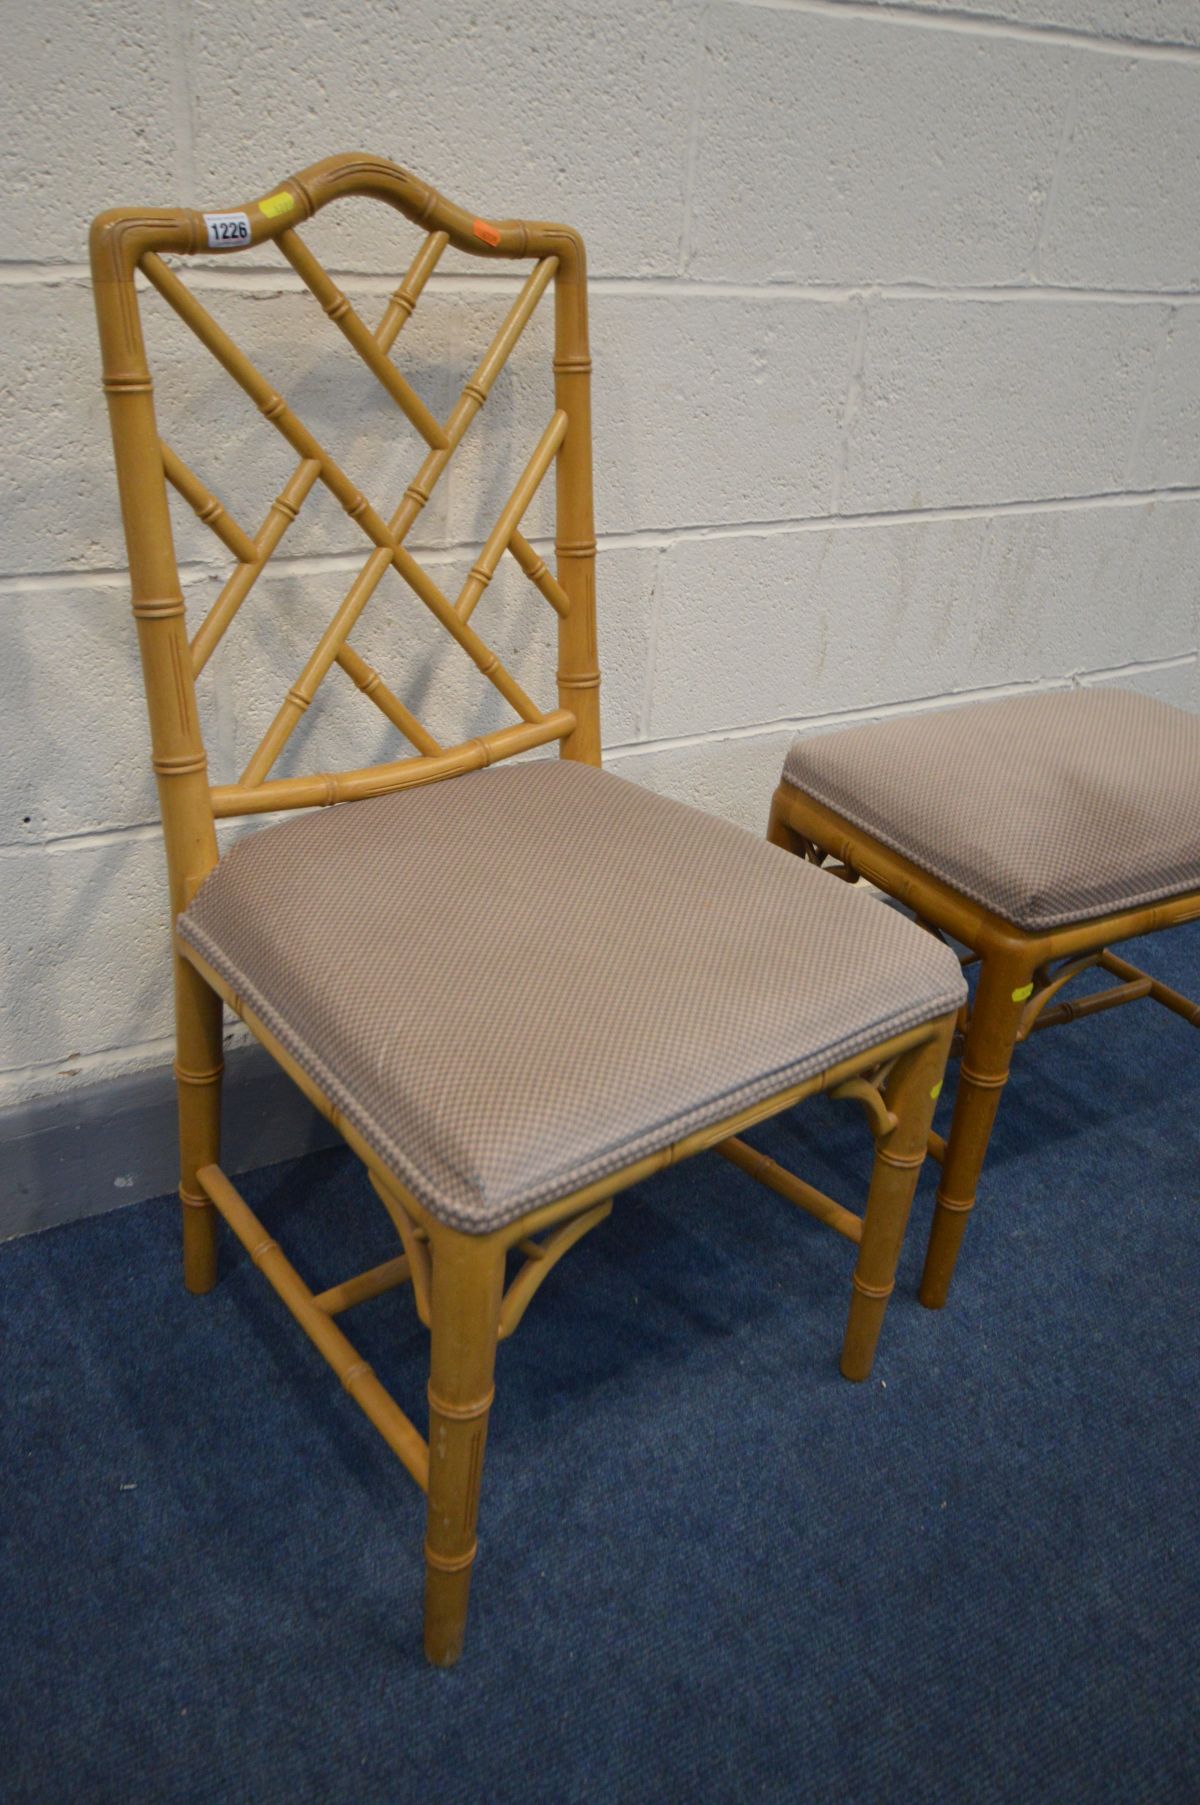 A CHINESE CHIPPENDALE STYLE BAMBOO SIDE CHAIR and matching stool (2) - Image 2 of 3